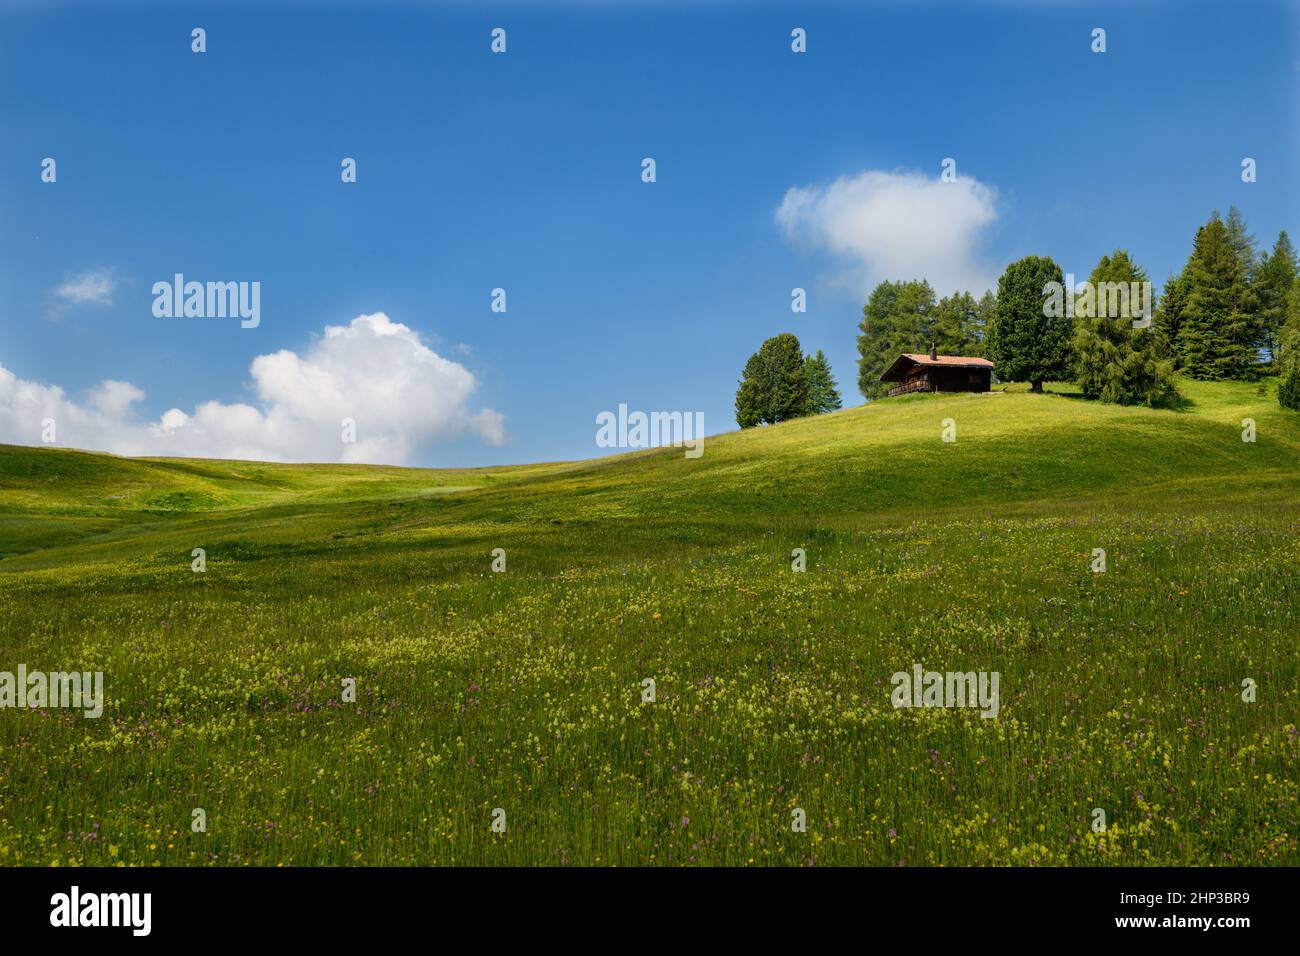 A small alpine hut on a gently sloping green meadow with a bright blue sky and a few fleecy clouds. Stock Photo